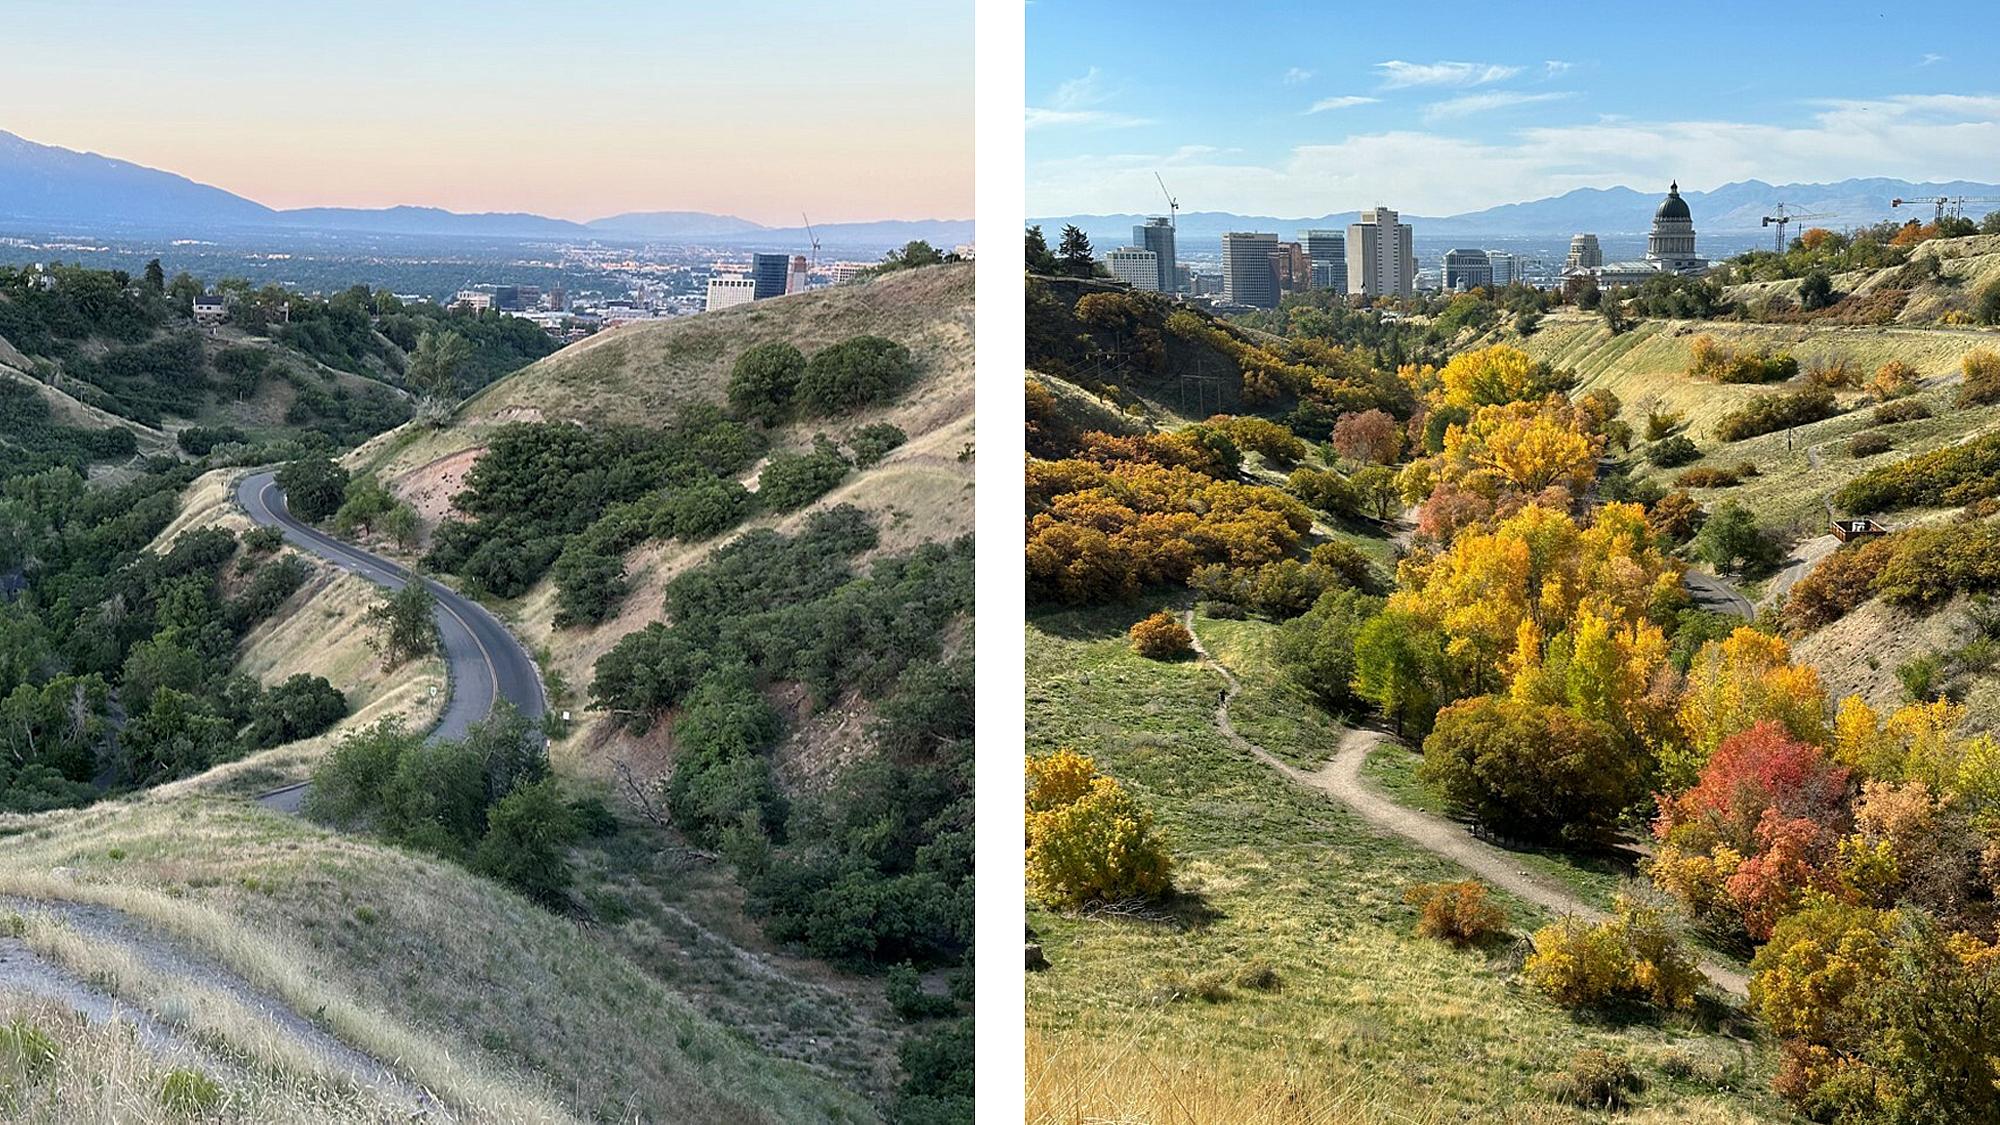 Two shots of the Salt Lake valley, showing summer and fall foliage